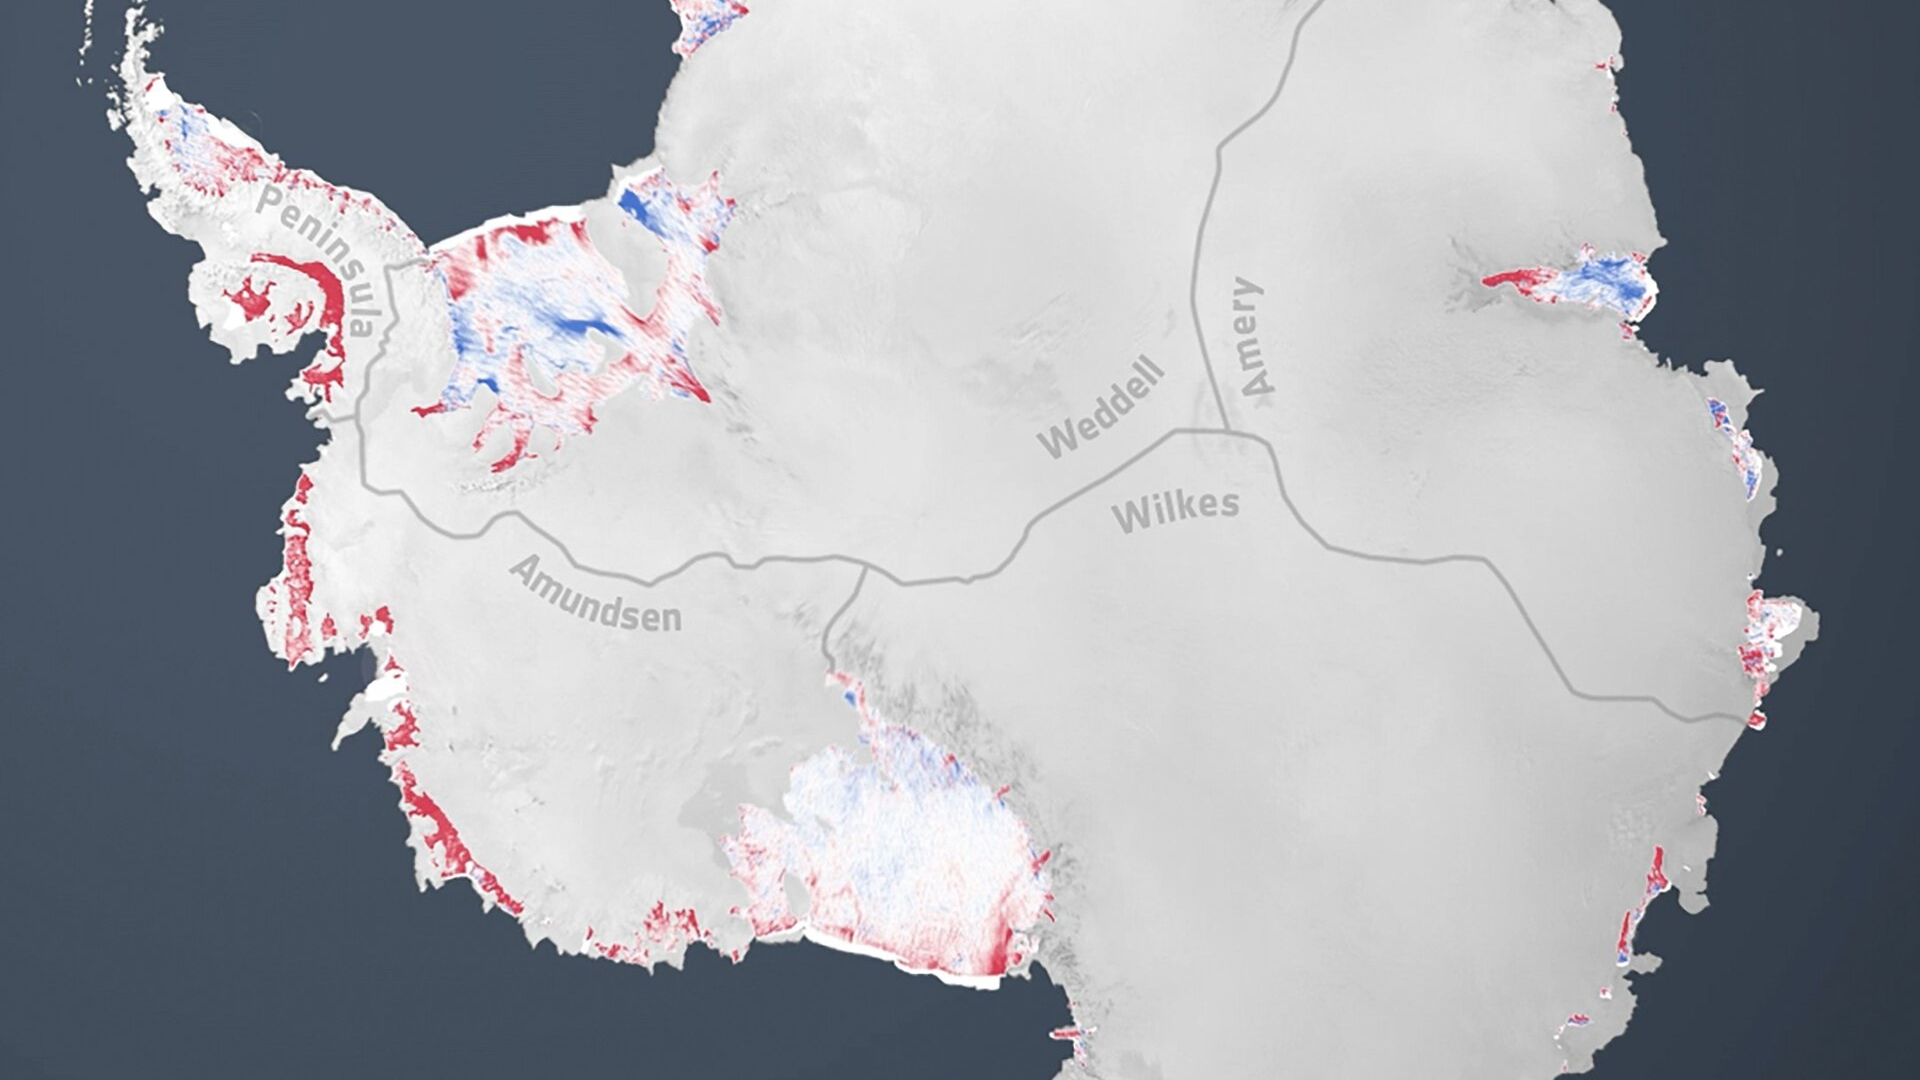 Satellites show Antarctic ice shelves have lost 74 trillion tons of water in 25 years Space